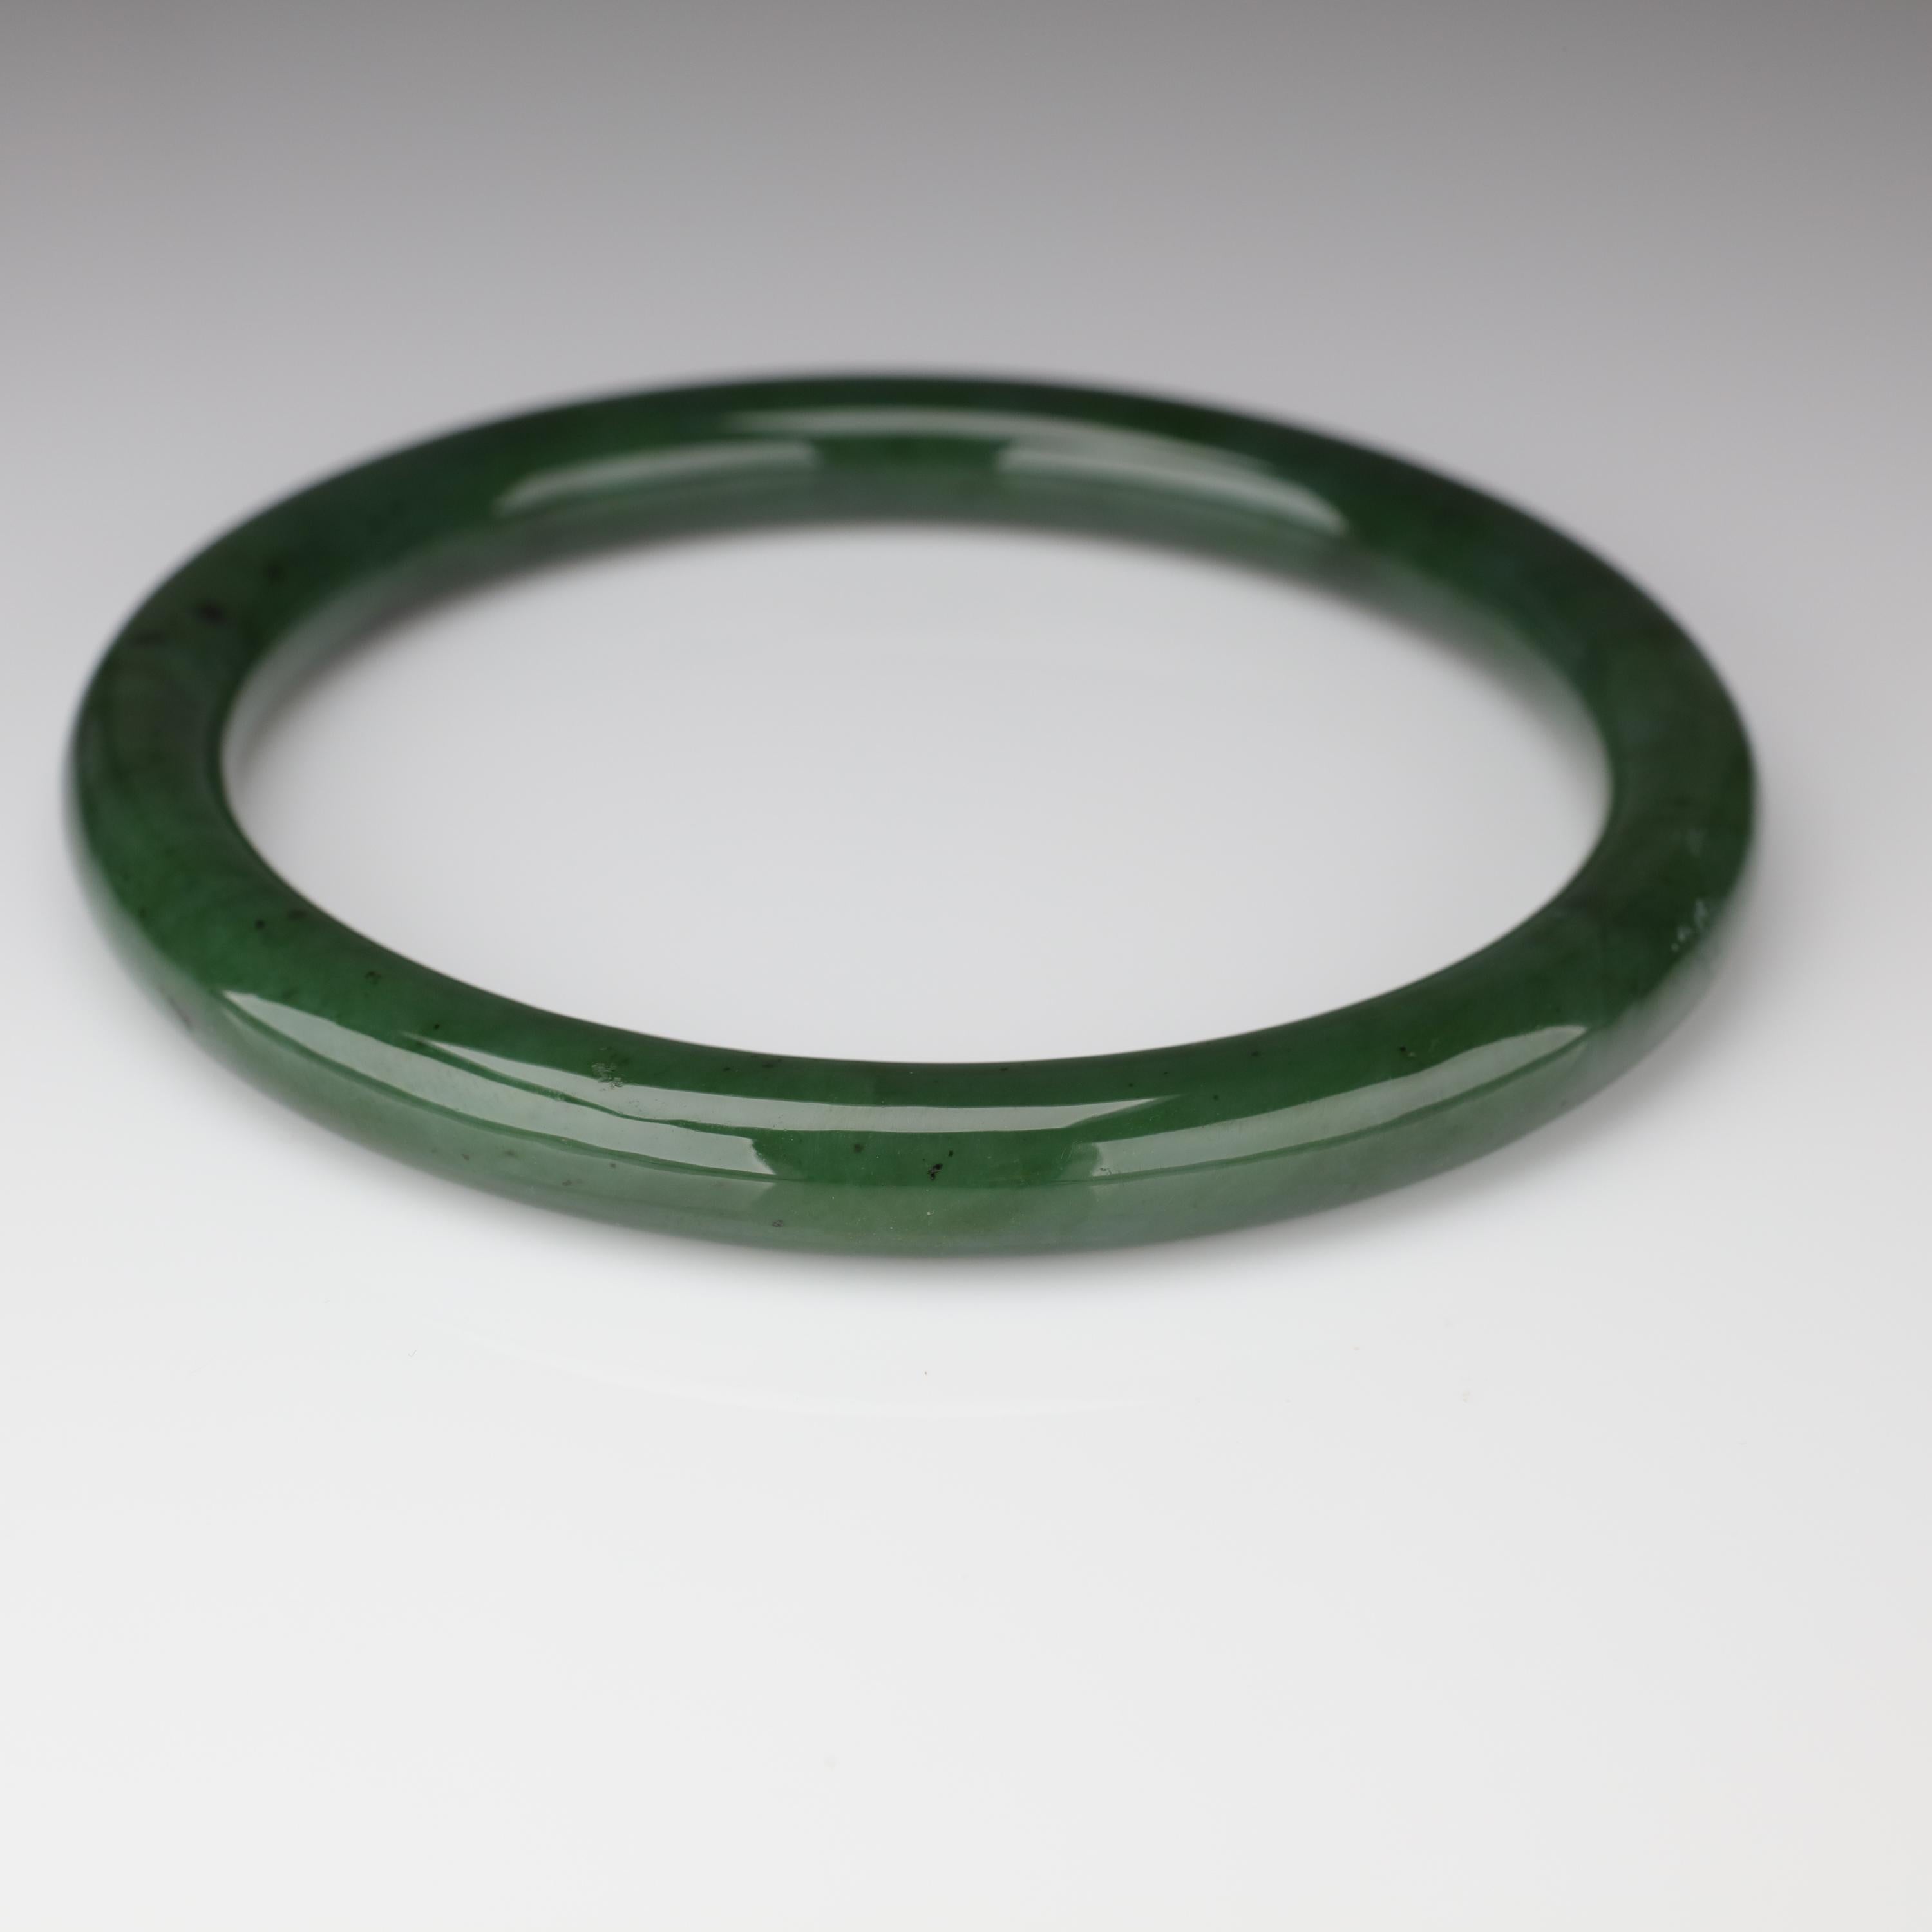 Jade bangles in large sizes for men are not easy to find. So I hoard them. This bangle has an inner diameter of 70 mm, meaning that even men with large hands should be able to wear it. There are plenty of videos and instructions online to help you